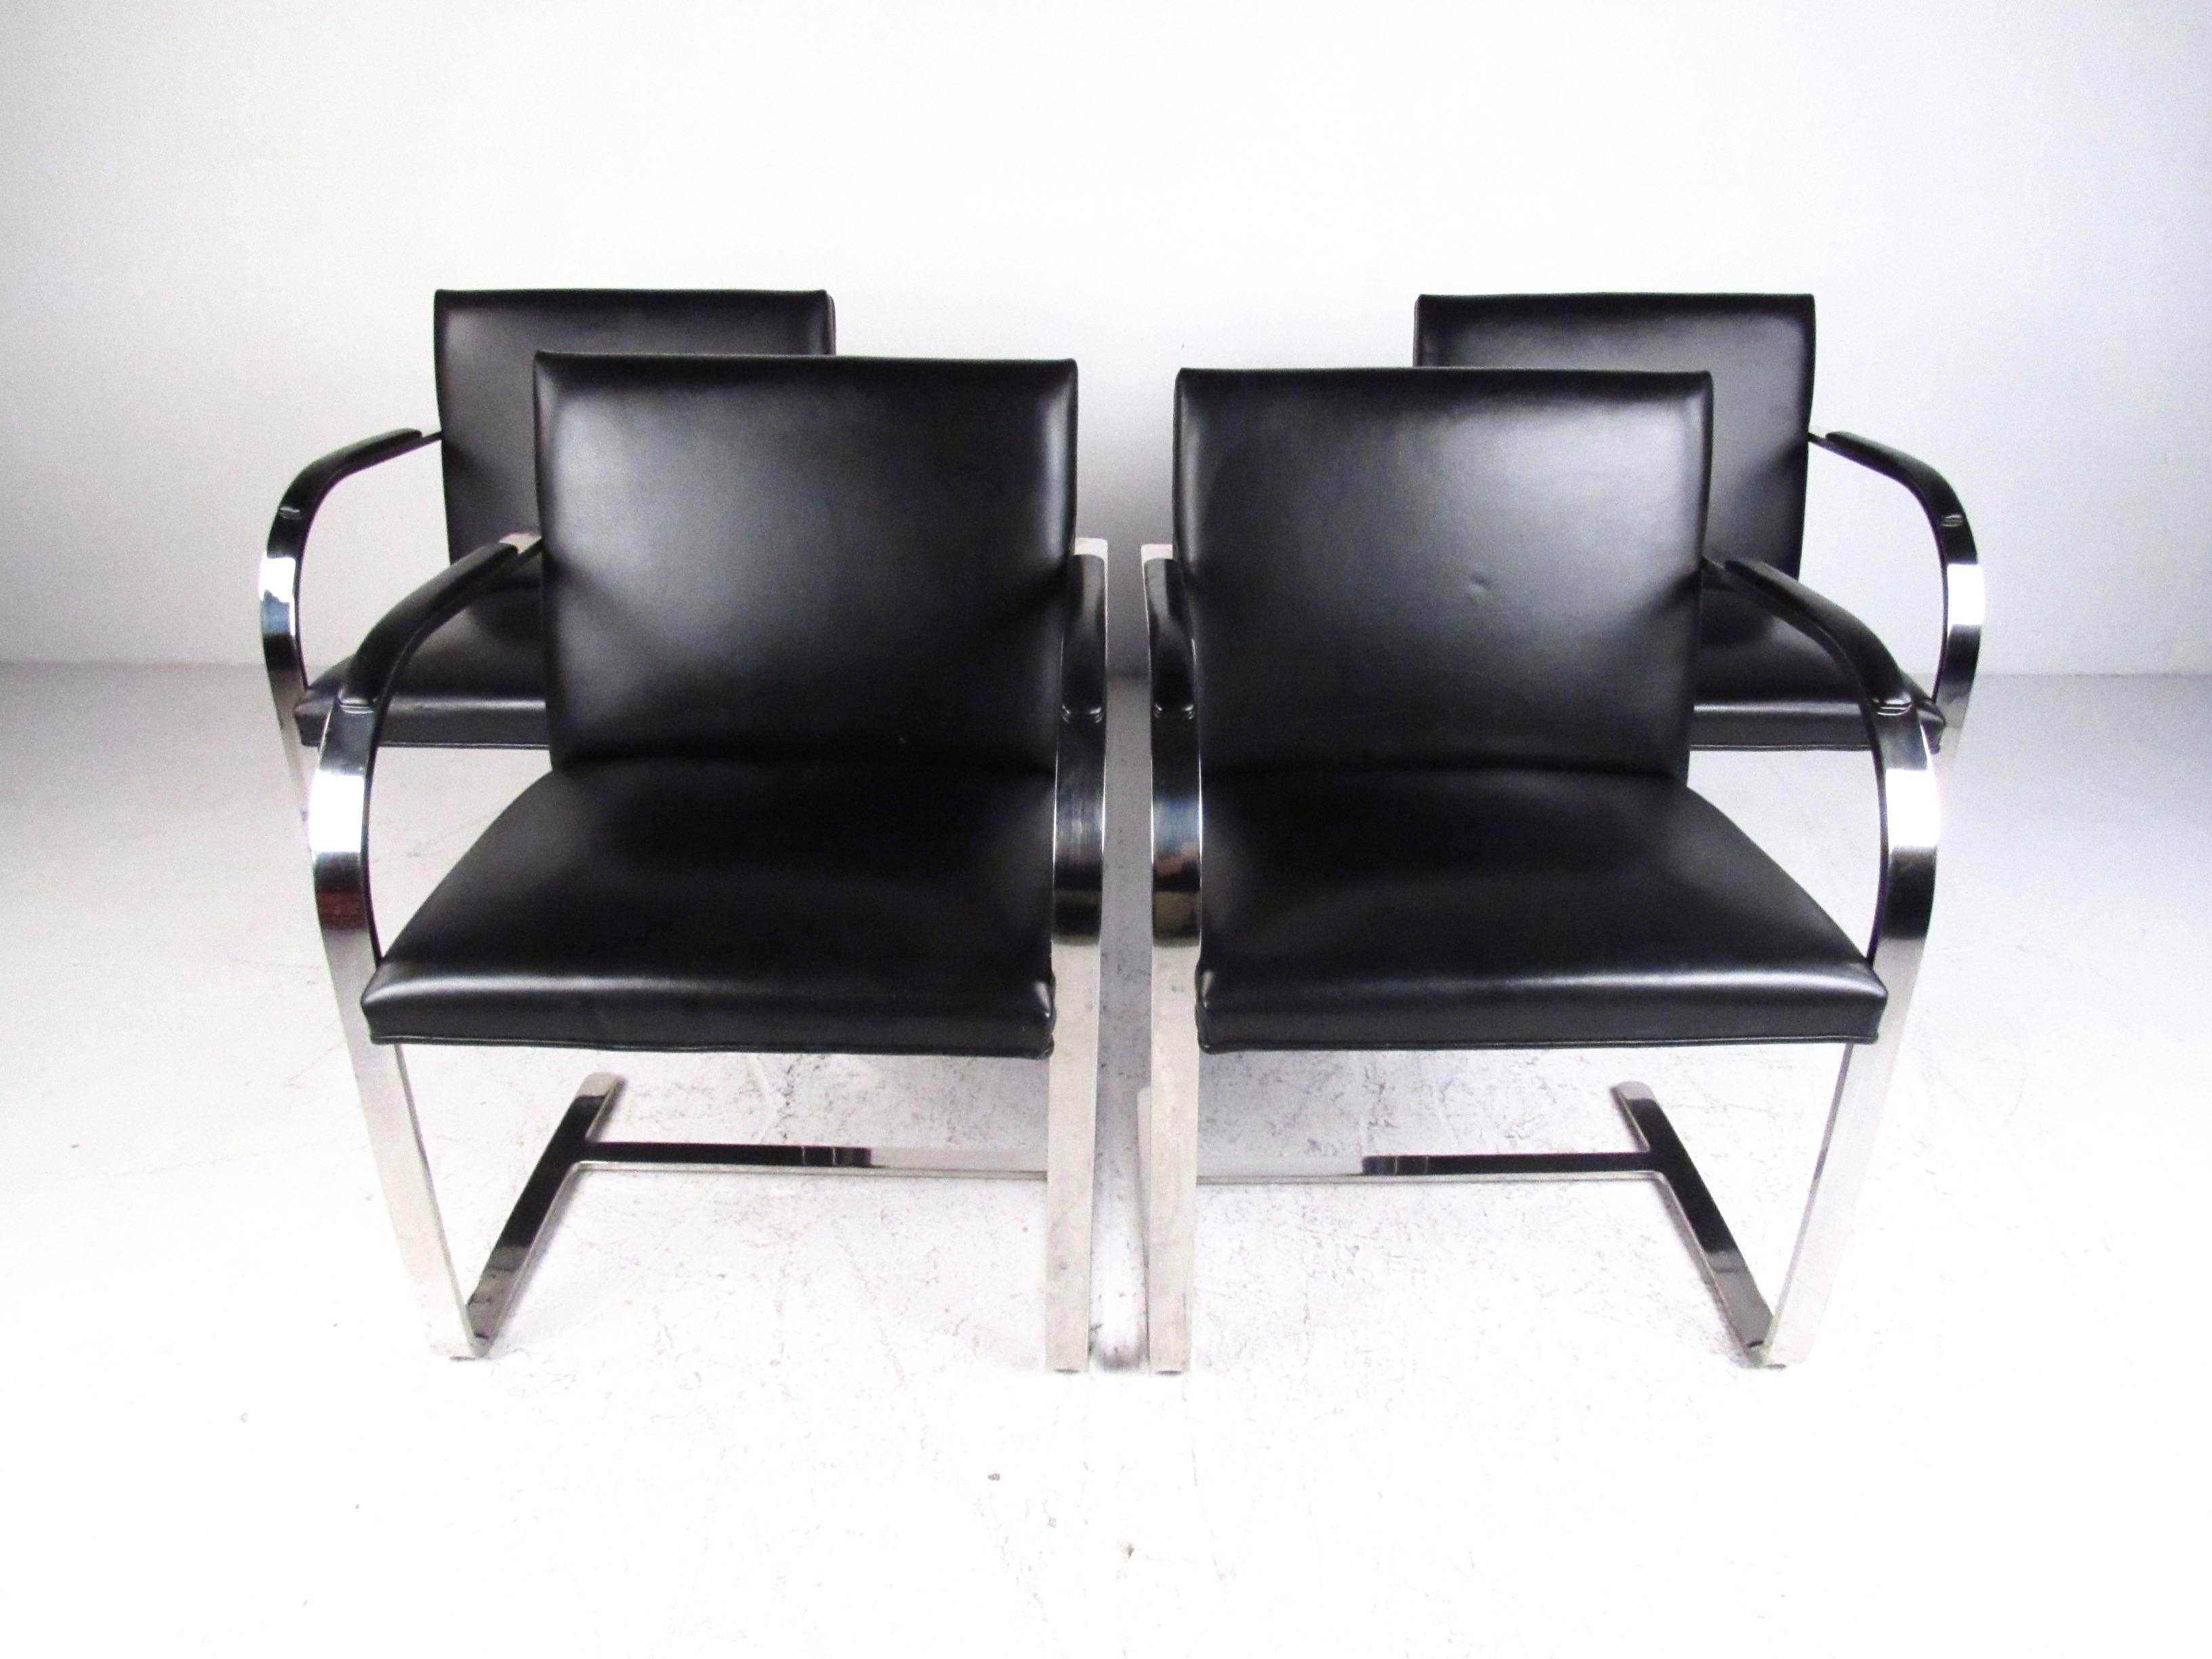 This stylish set of four arm chairs by Brueton make a stylish modern addition to any interior, from dining to conference room. Heavy stainless steel frame and vintage upholstery add to the charm of the set. Spacious proportions and padded arm rests